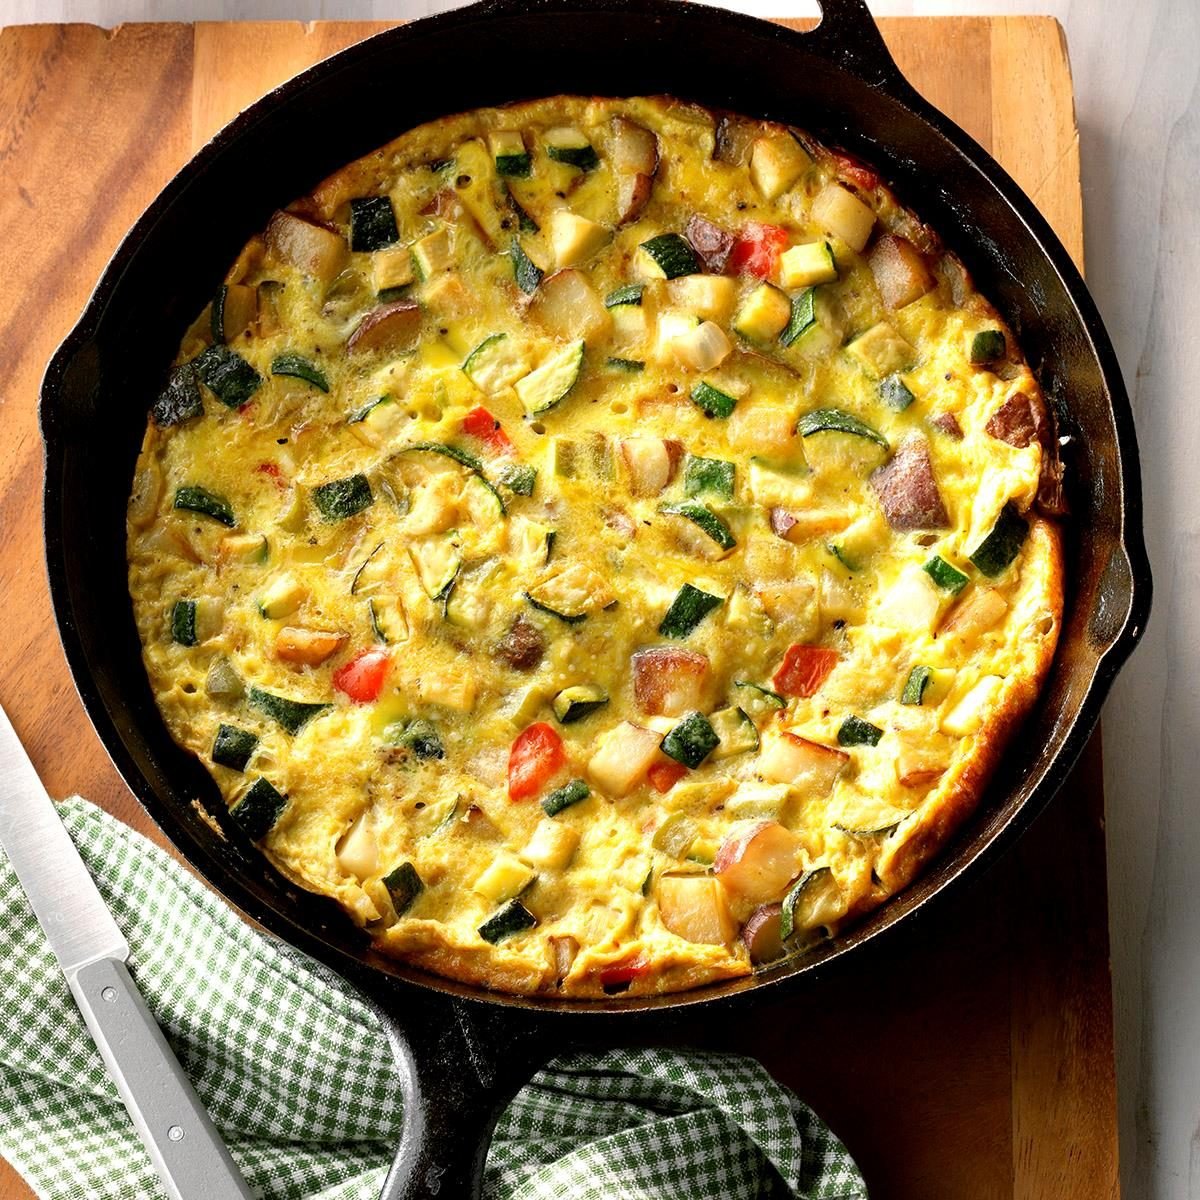 How to Make a Frittata